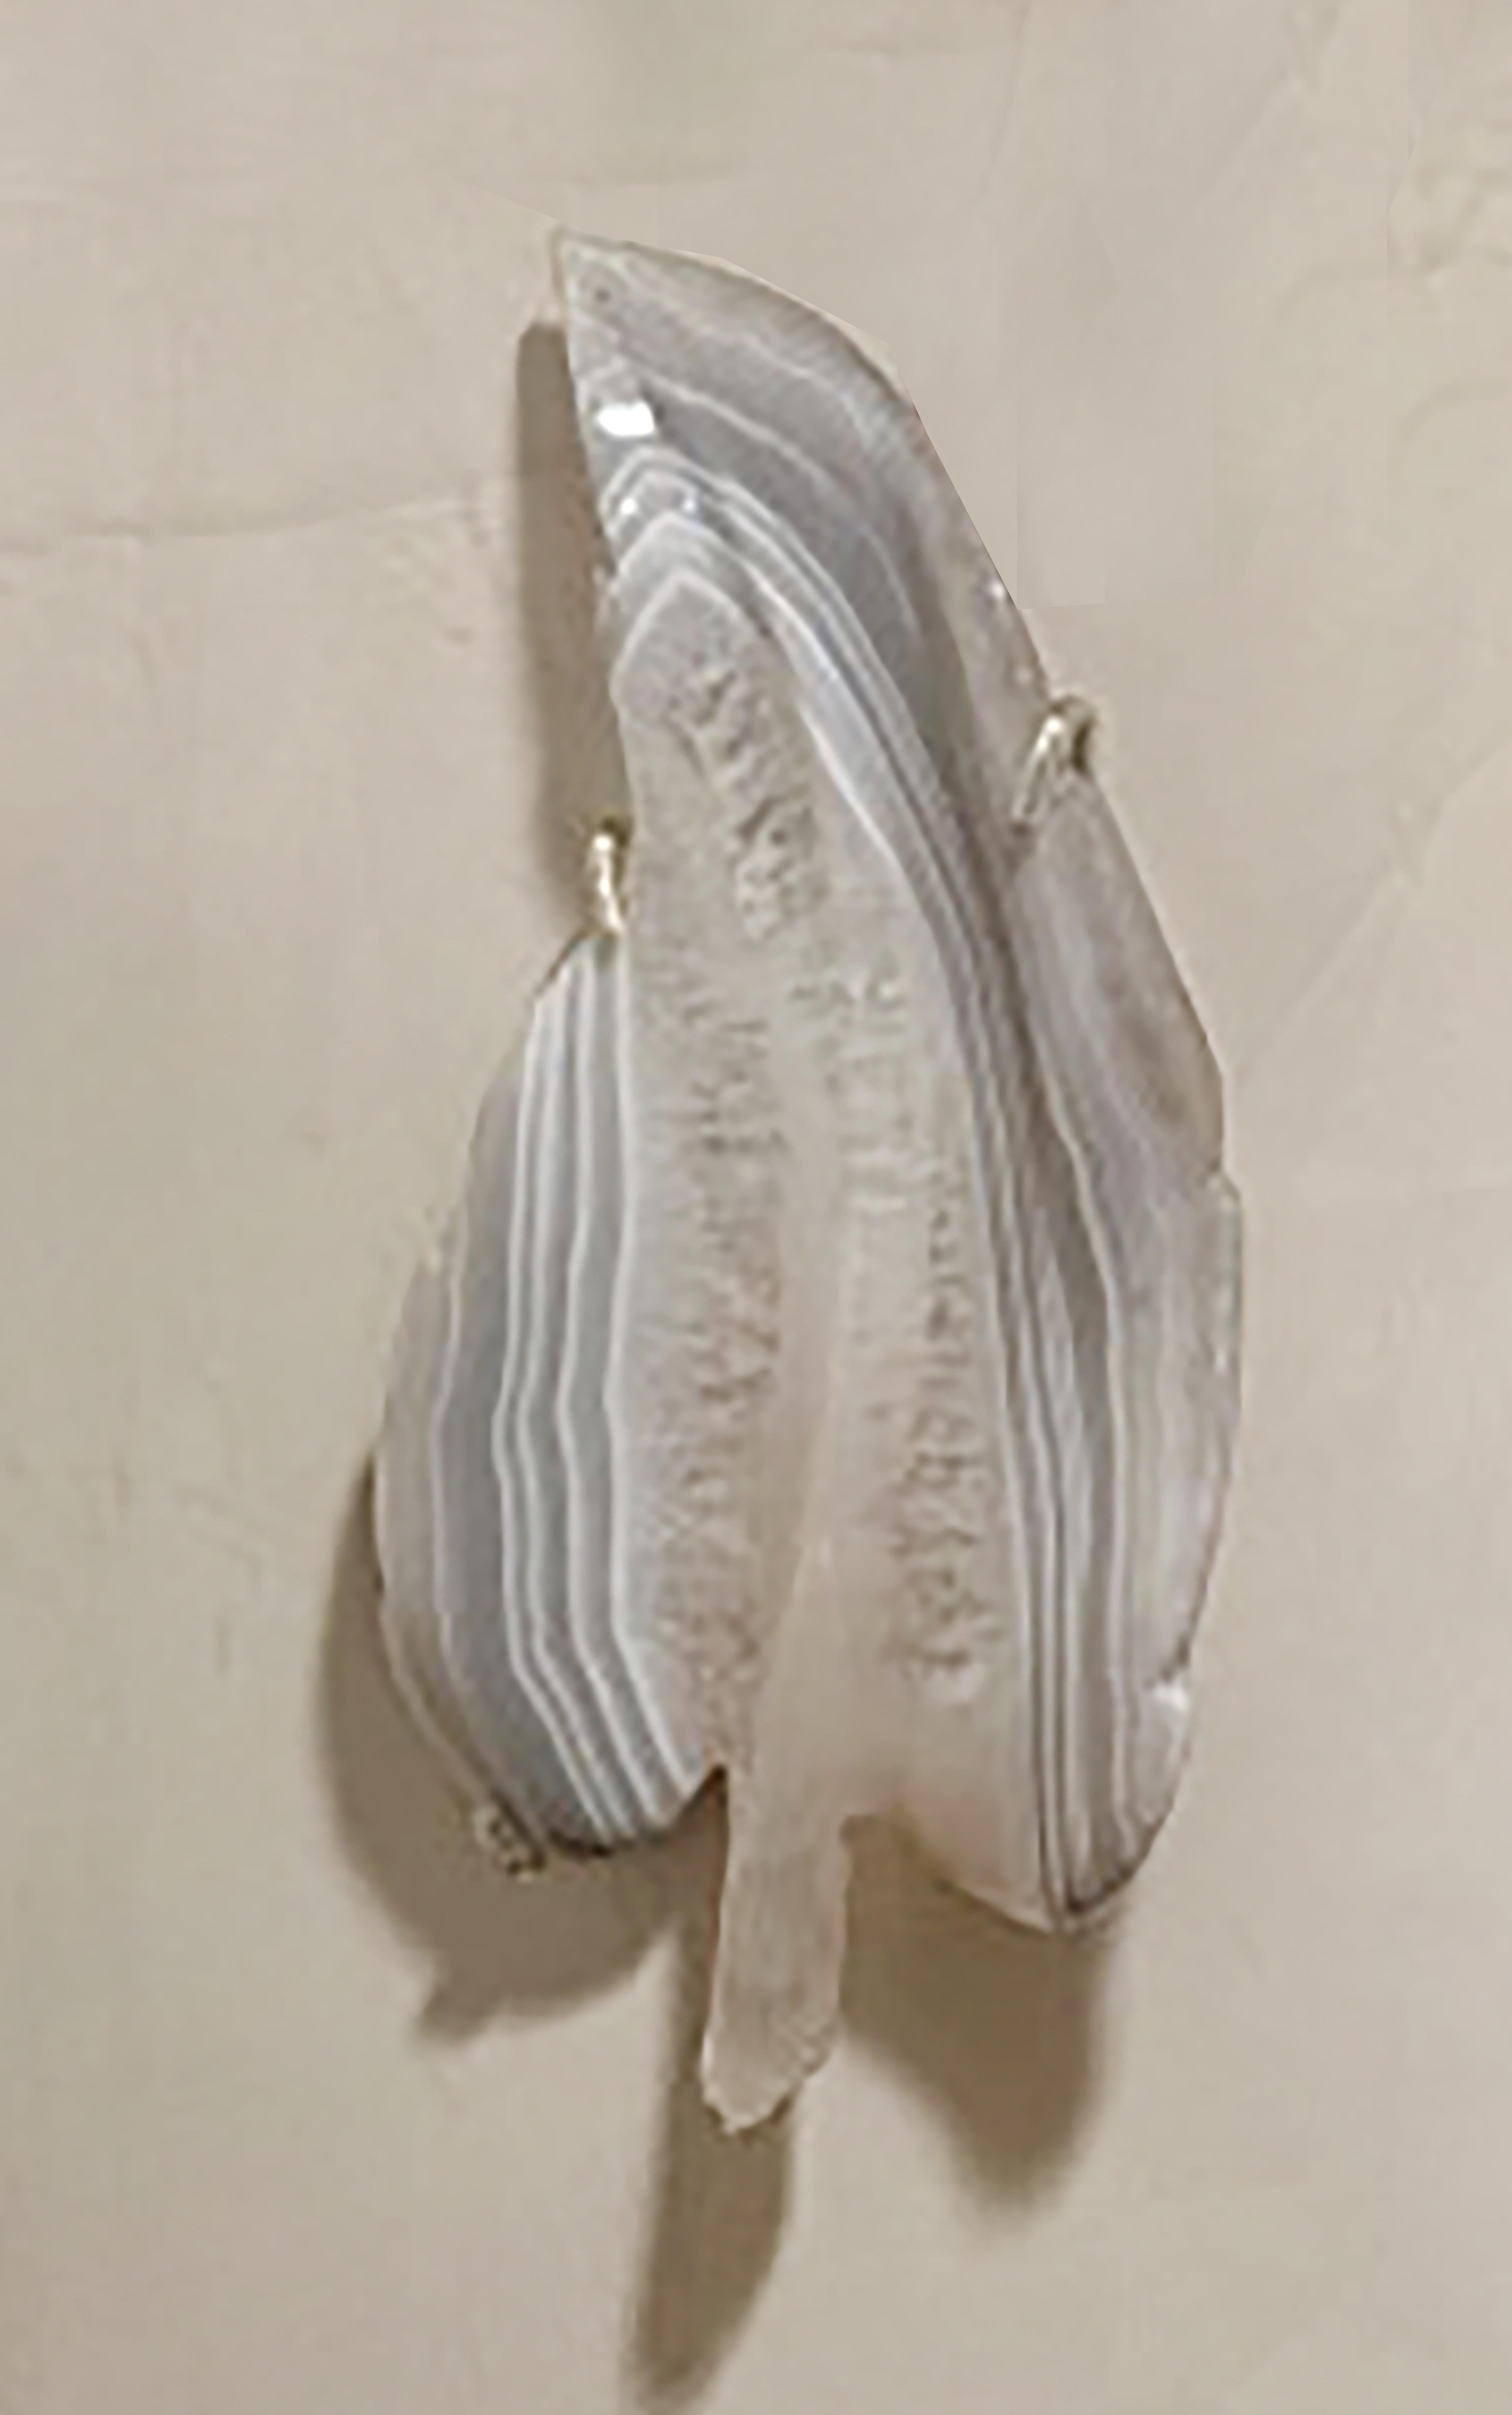 An intriguing custom carved and polished sculptural leaf. Made from agate in a pearl white color with alternating light gray-brown and white stripes on either side of the leaf.

In very good condition. Some gentle wear and aging consistent with age